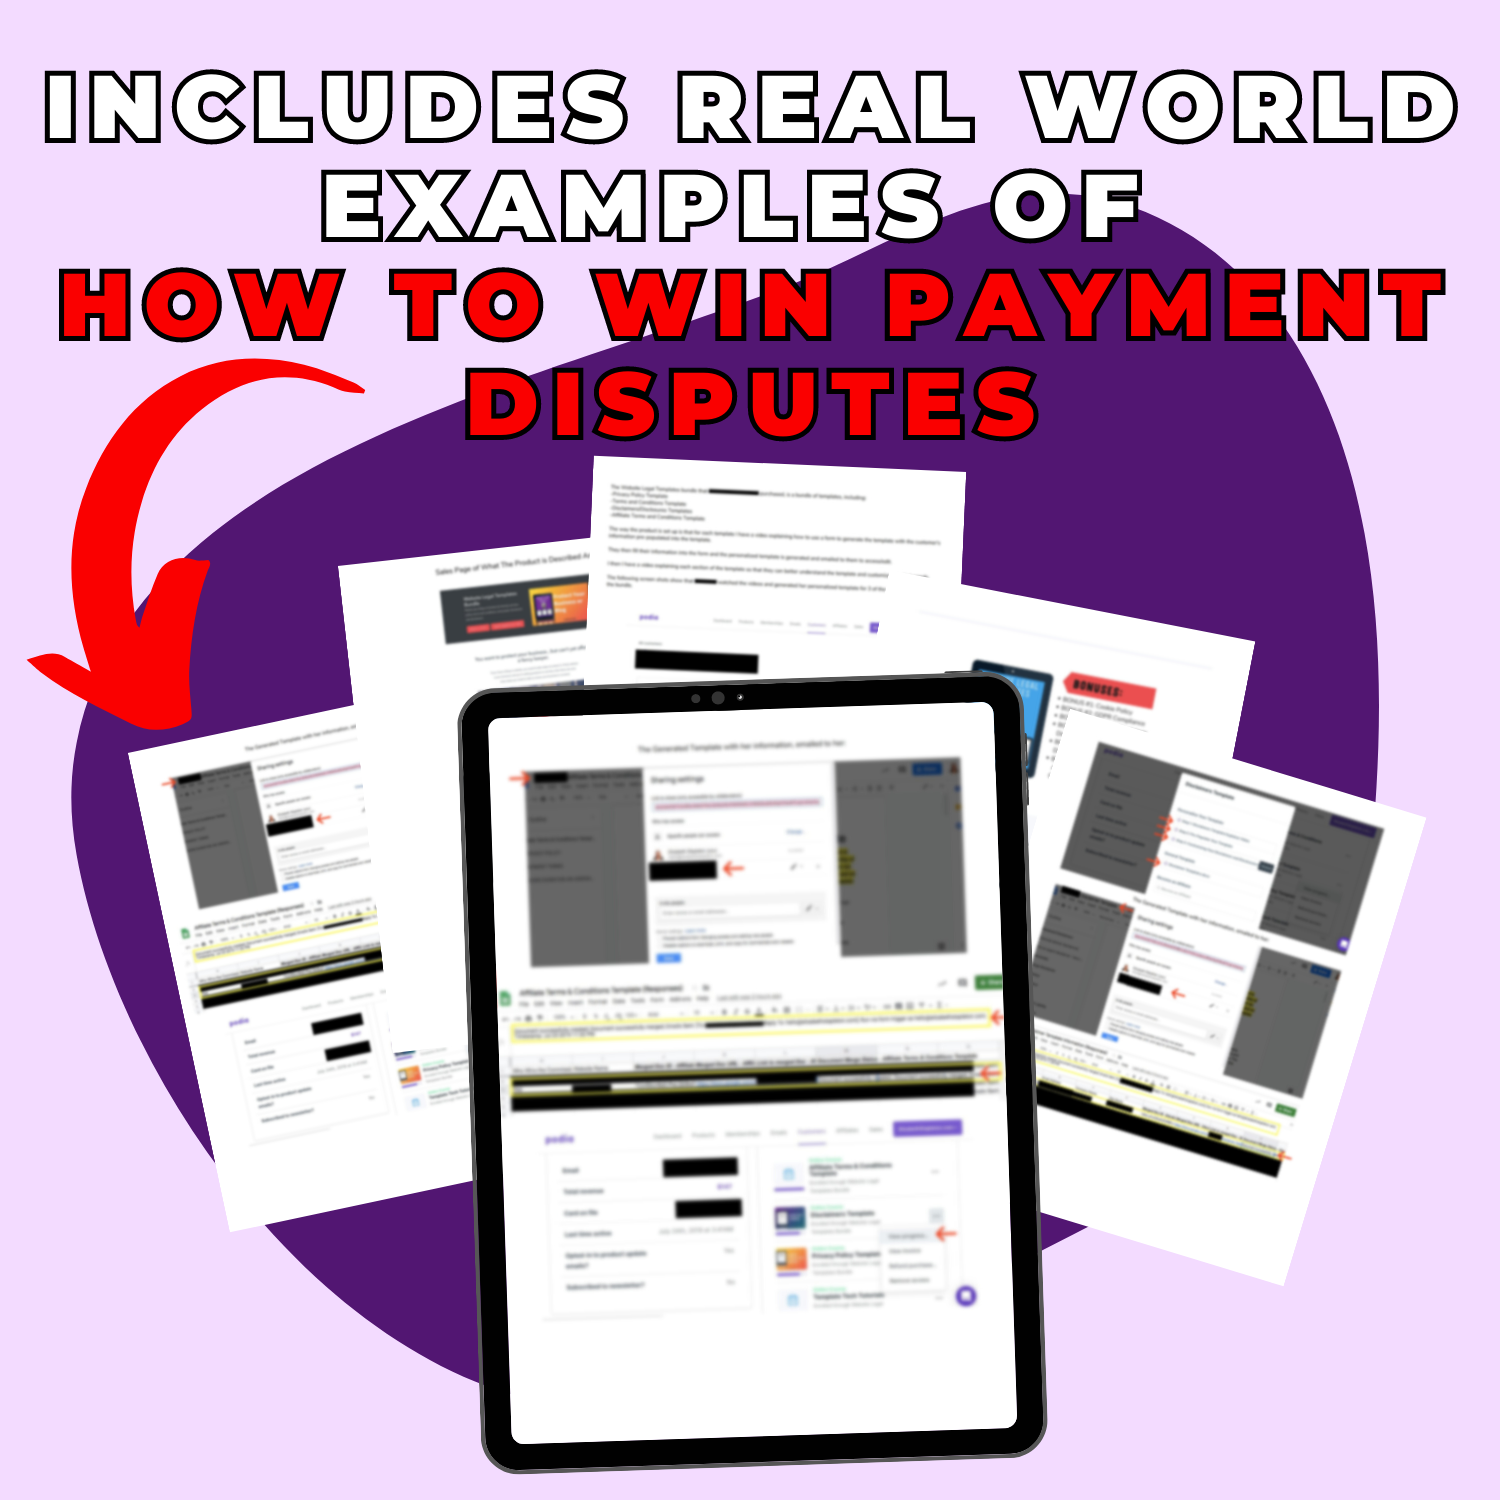 How to win payment disputes - includes real world examples from The Complete Guide to Offering Low Priced Payment Plans in Your Business at the Blogger Breakthrough Summit.